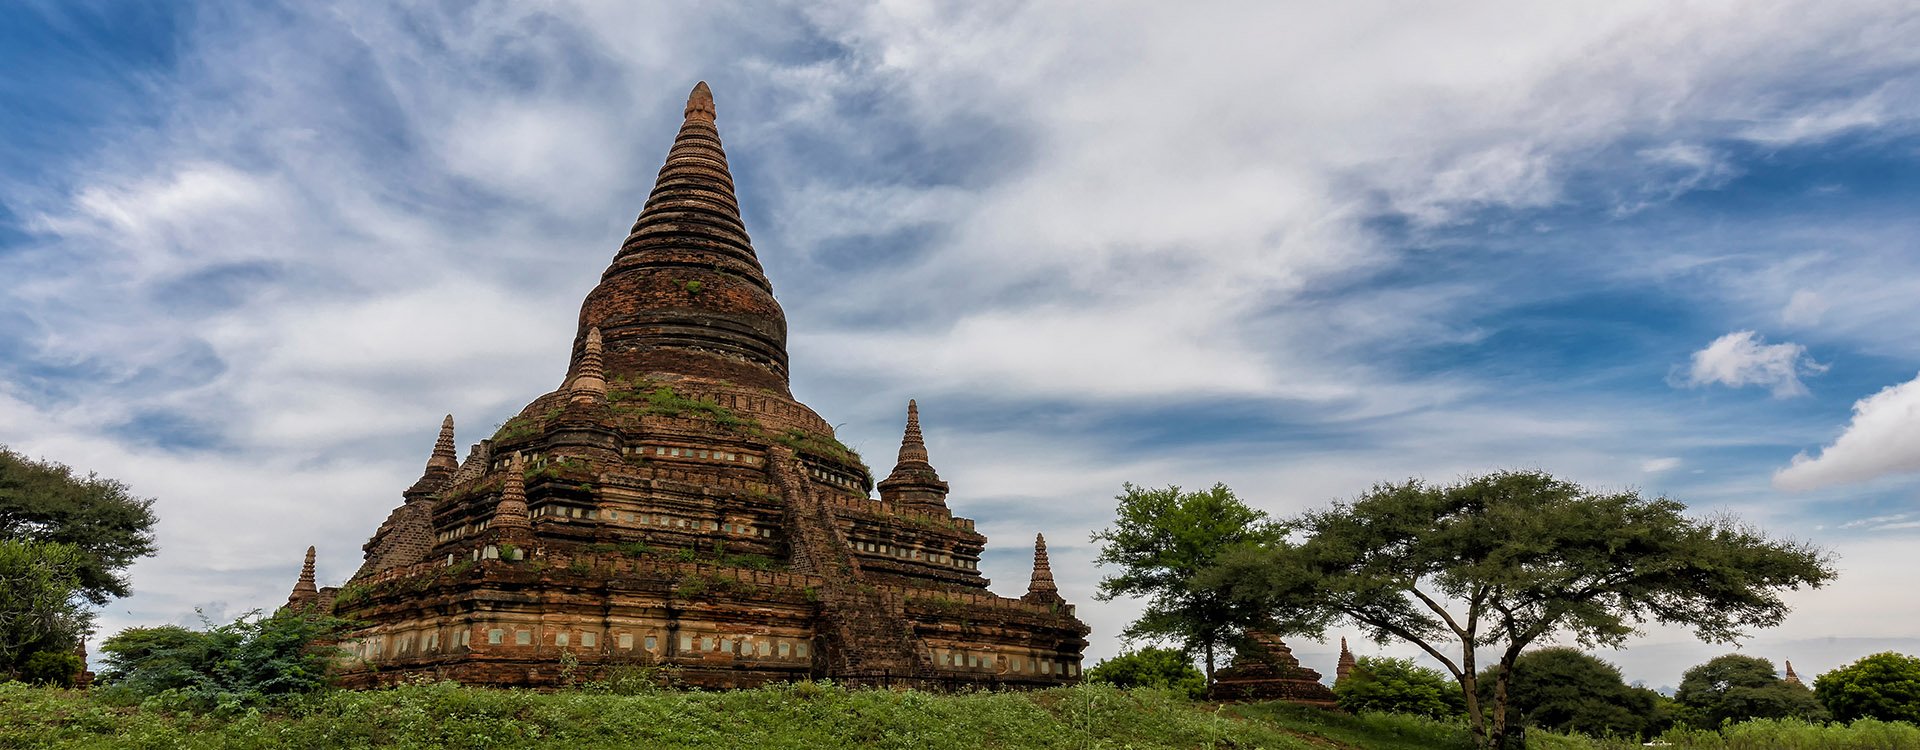 Myanmar Bagan temple on a clear on grassland